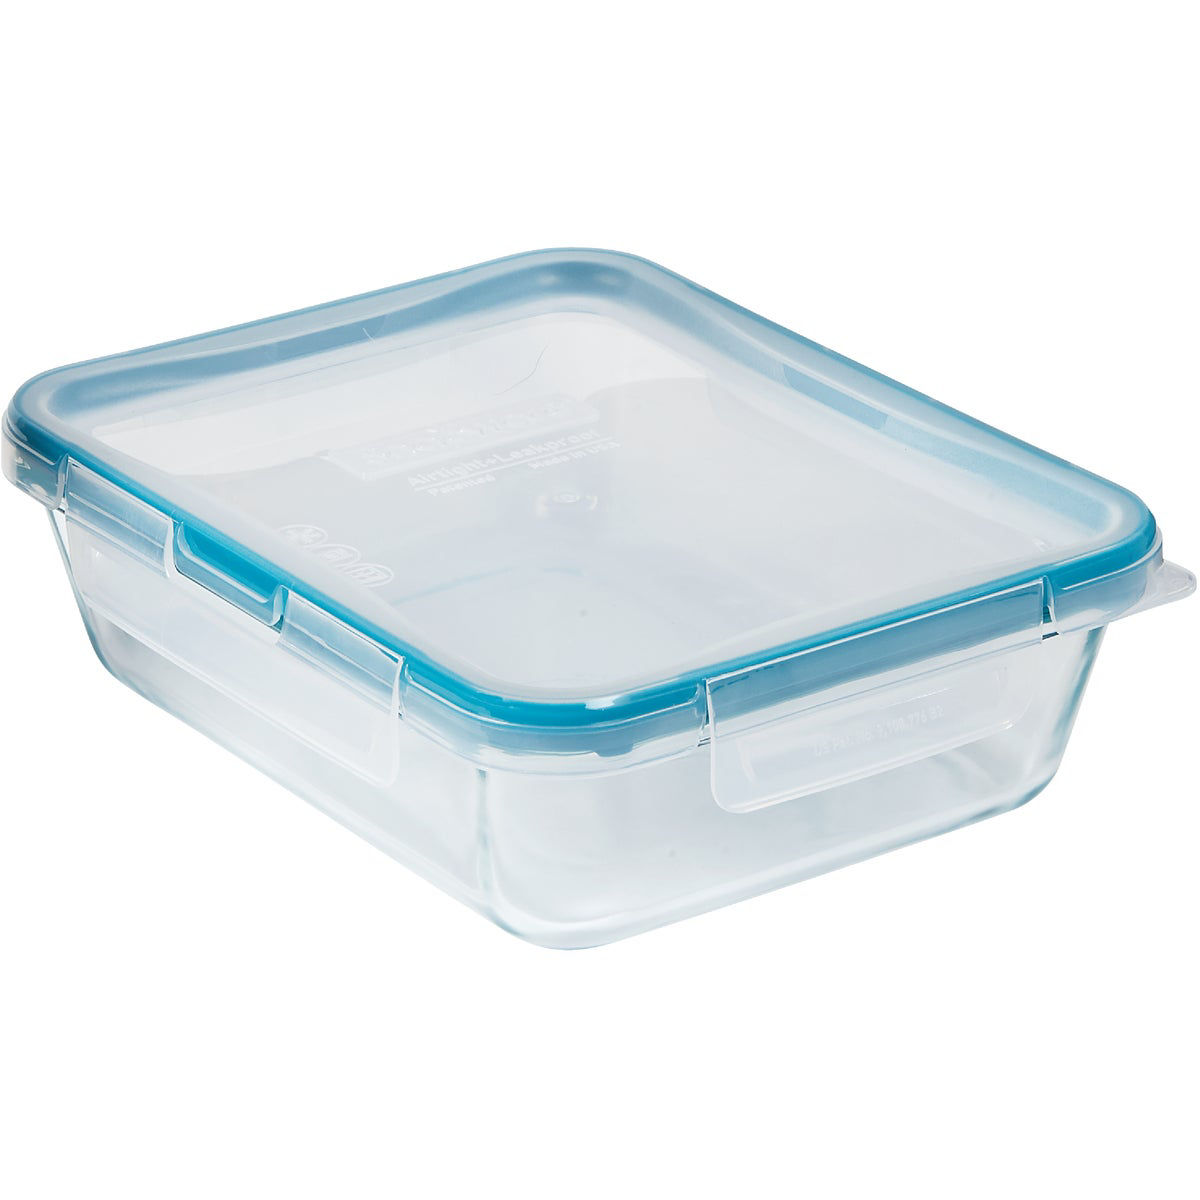 Snapware Food Storage Container with Large Handle, 1 Count